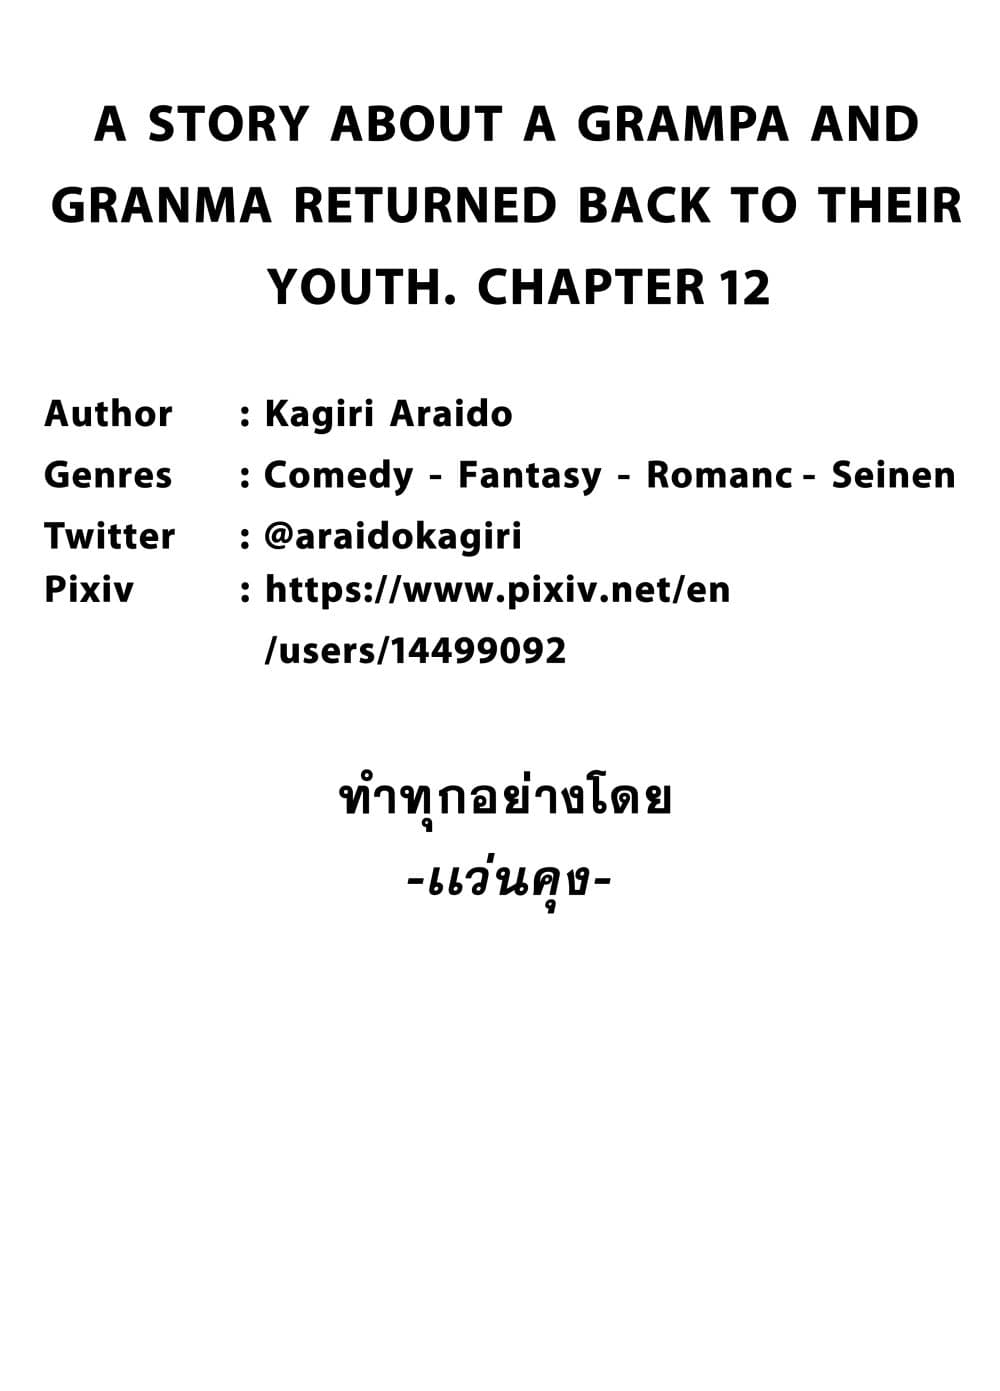 A Story About A Grampa and Granma Returned Back to their Youth คู่รักวัยดึกหวนคืนวัยหวาน 12-12